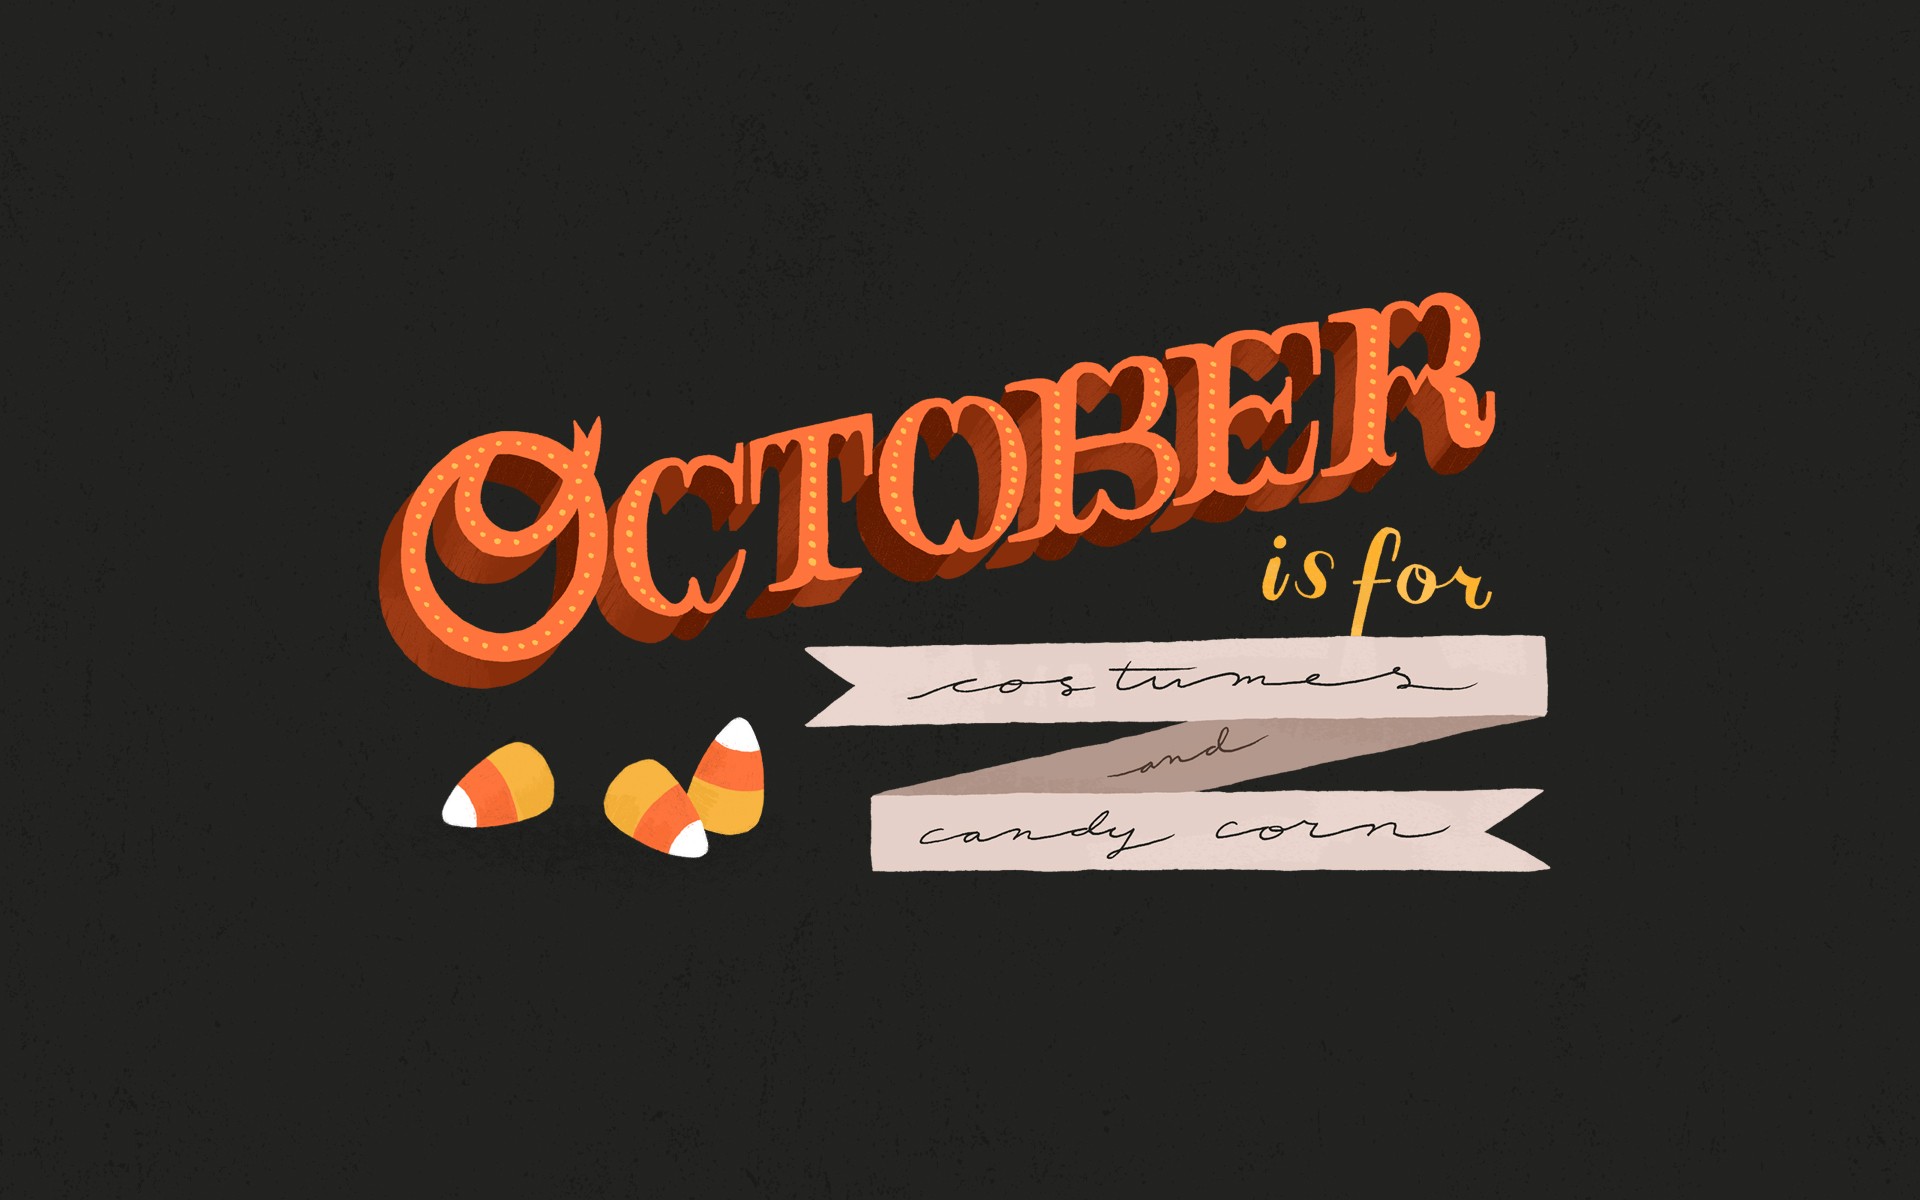 25 Best october desktop backgrounds You Can Save It At No Cost ...